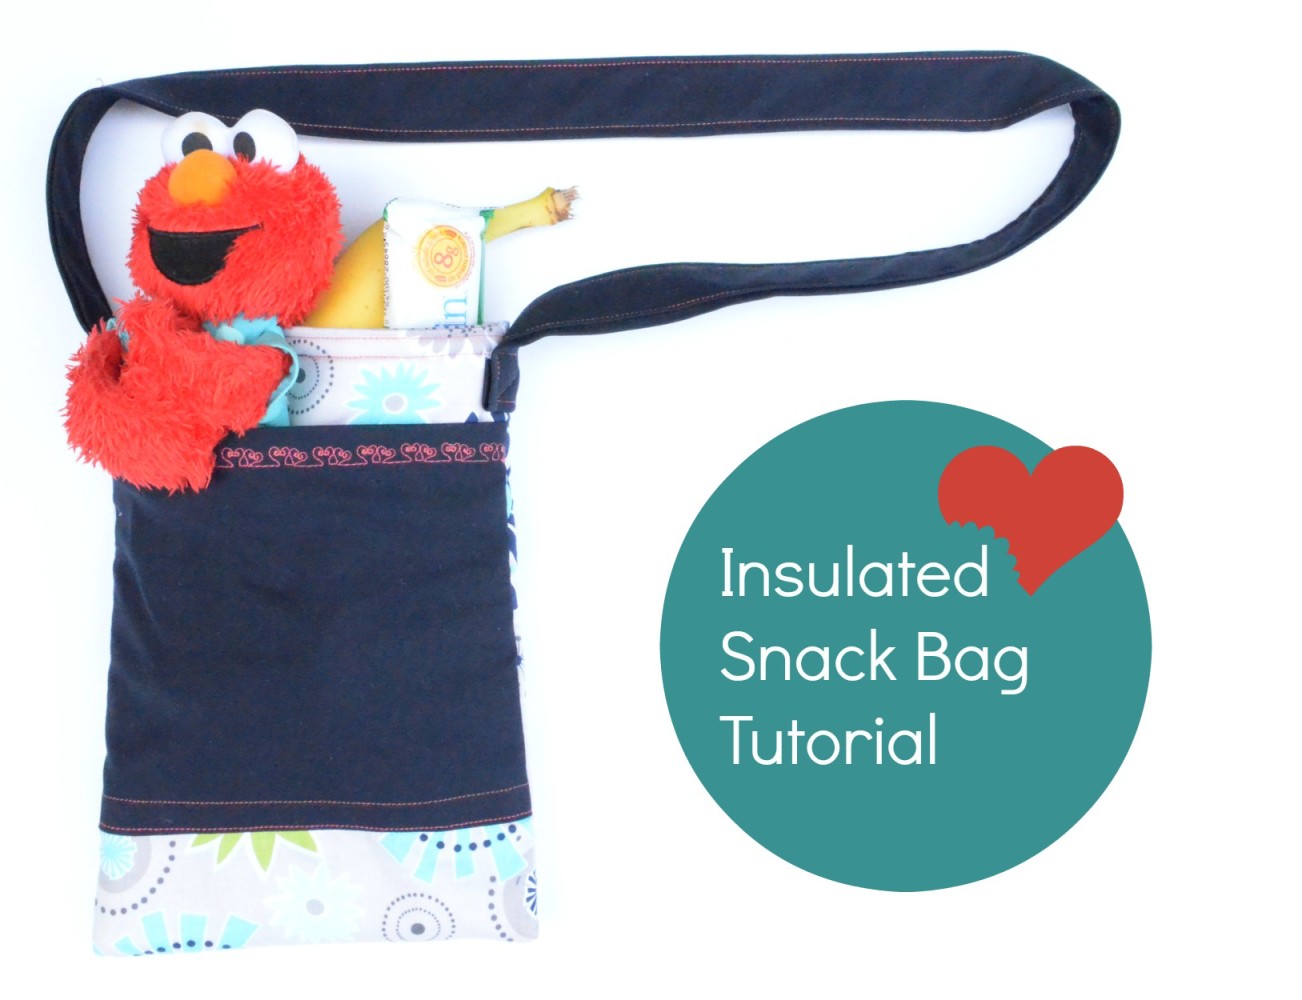 Insulated Snack bag